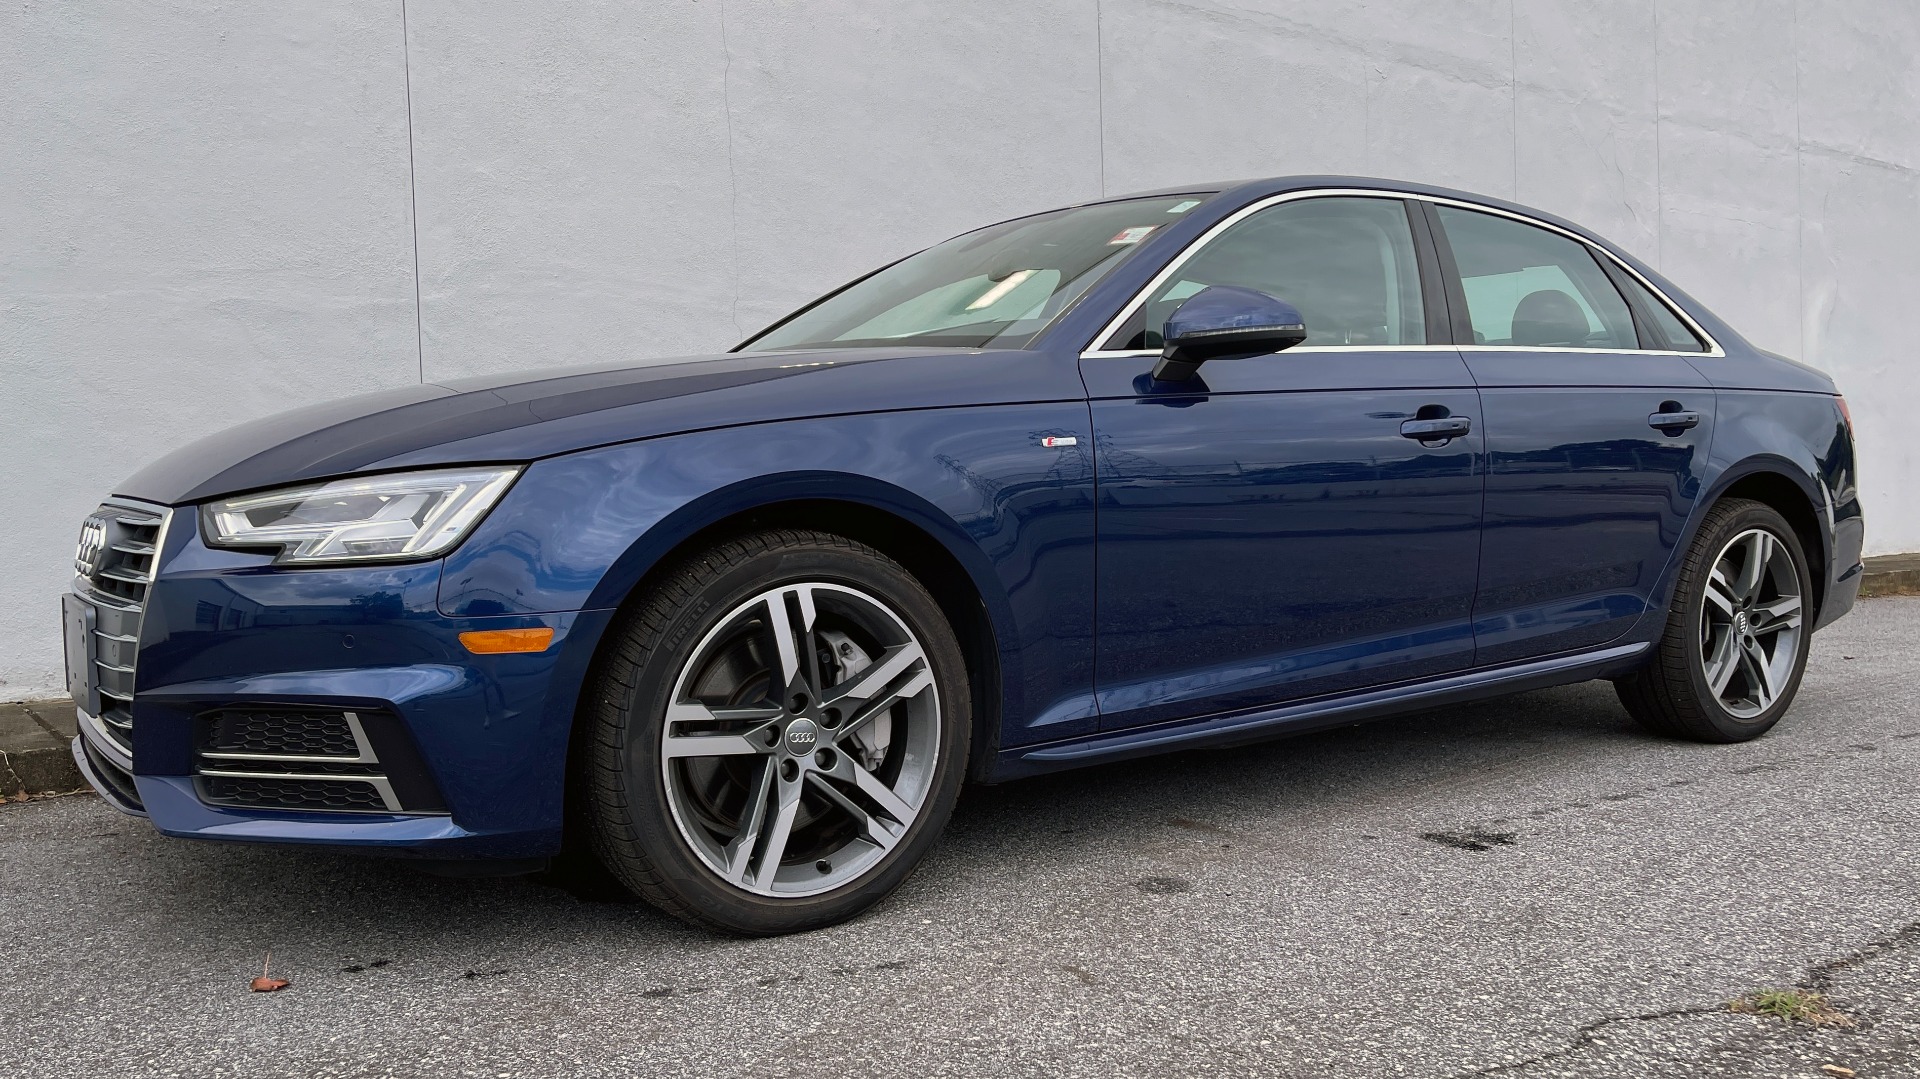 Used 2018 Audi A4 PREMIUM PLUS 2.0T / SUNROOF / CLD WTHR / B&O SND / REARVIEW for sale Sold at Formula Imports in Charlotte NC 28227 3